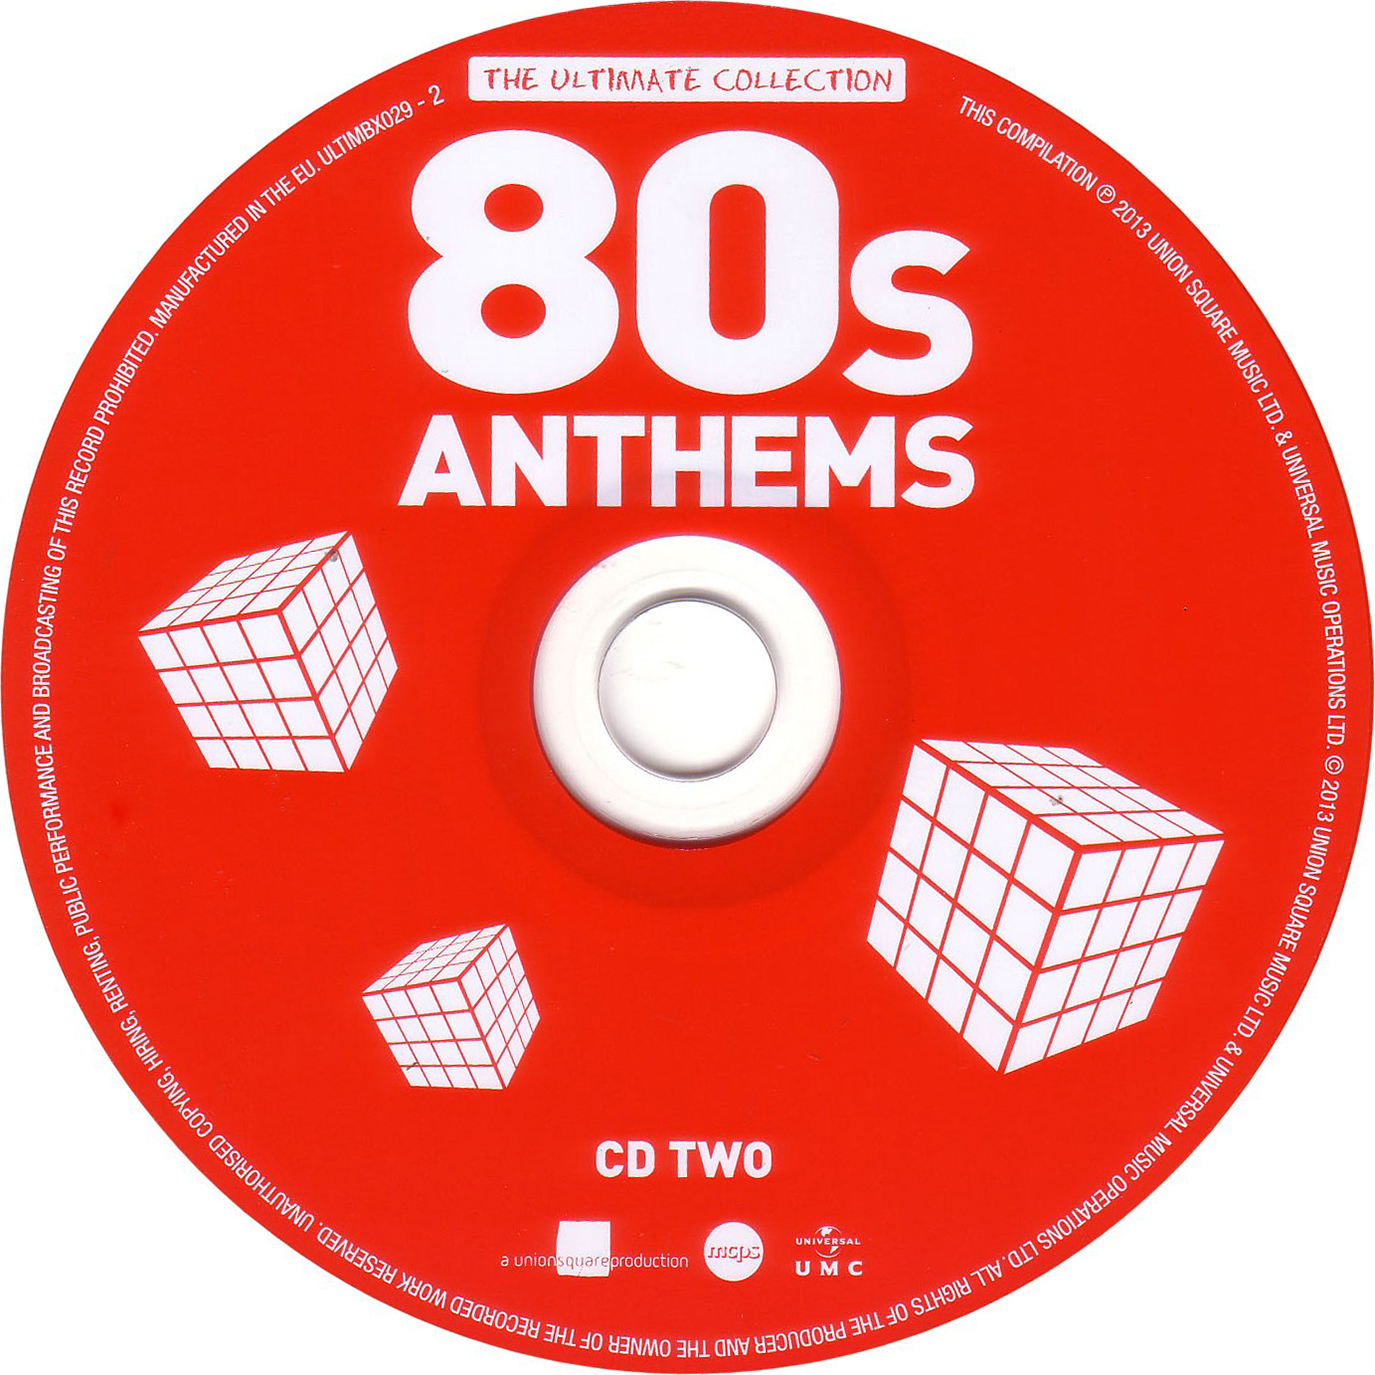 1984 Anthem collection. Forgotten Hits the Ultimate collection. Flac c